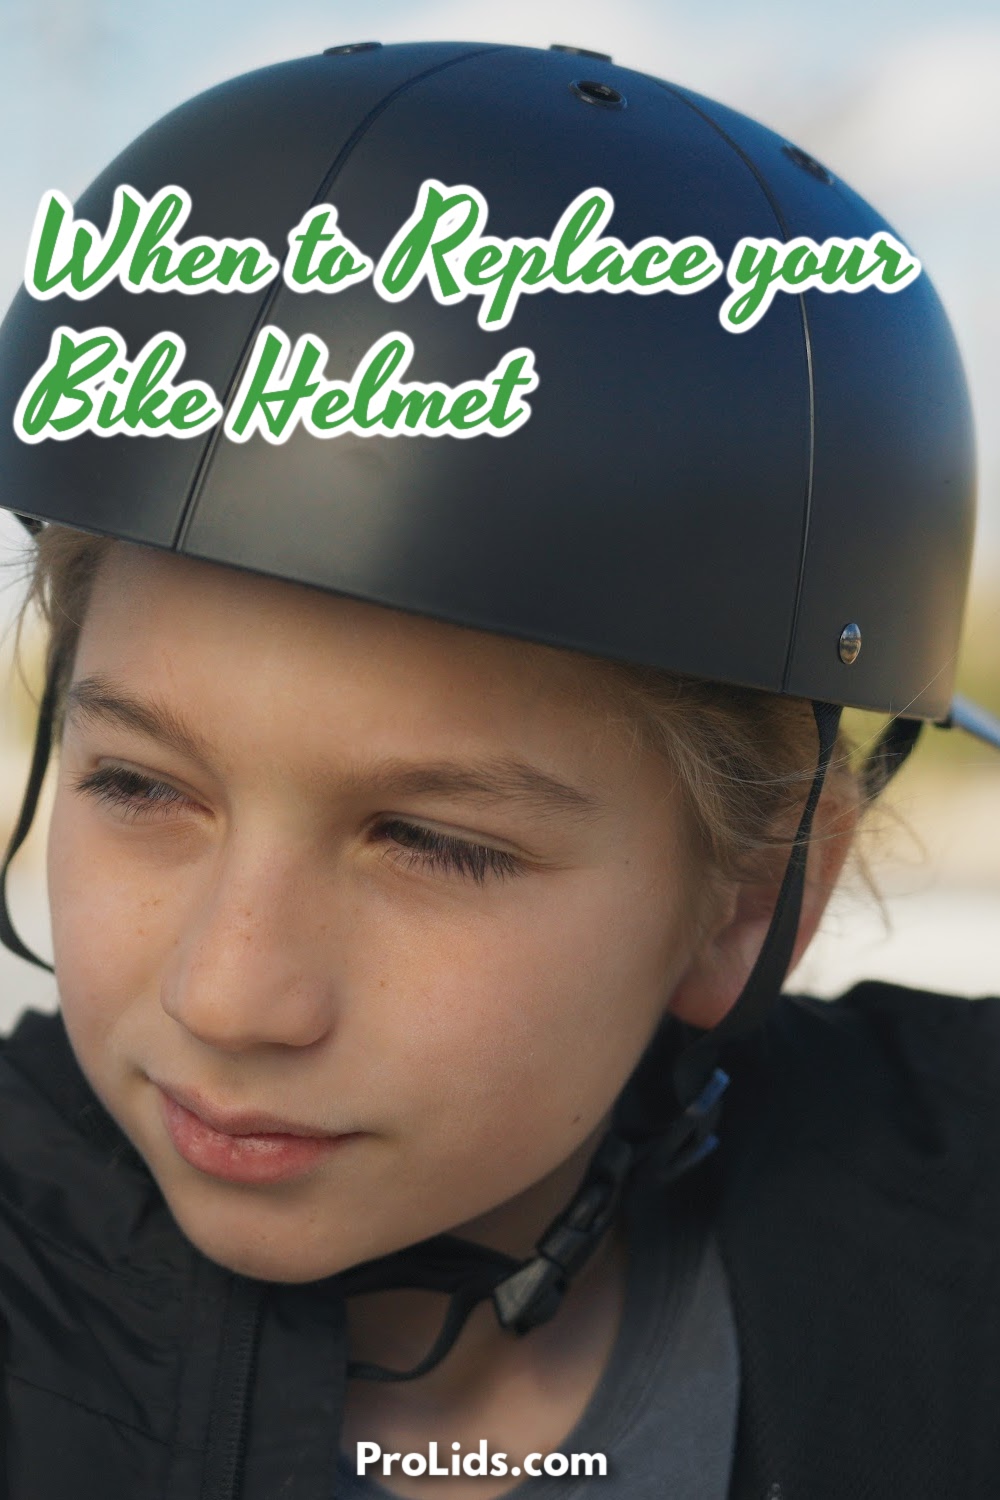 You should learn how to know when to replace your bike helmet to remain as safe as possible while riding around.